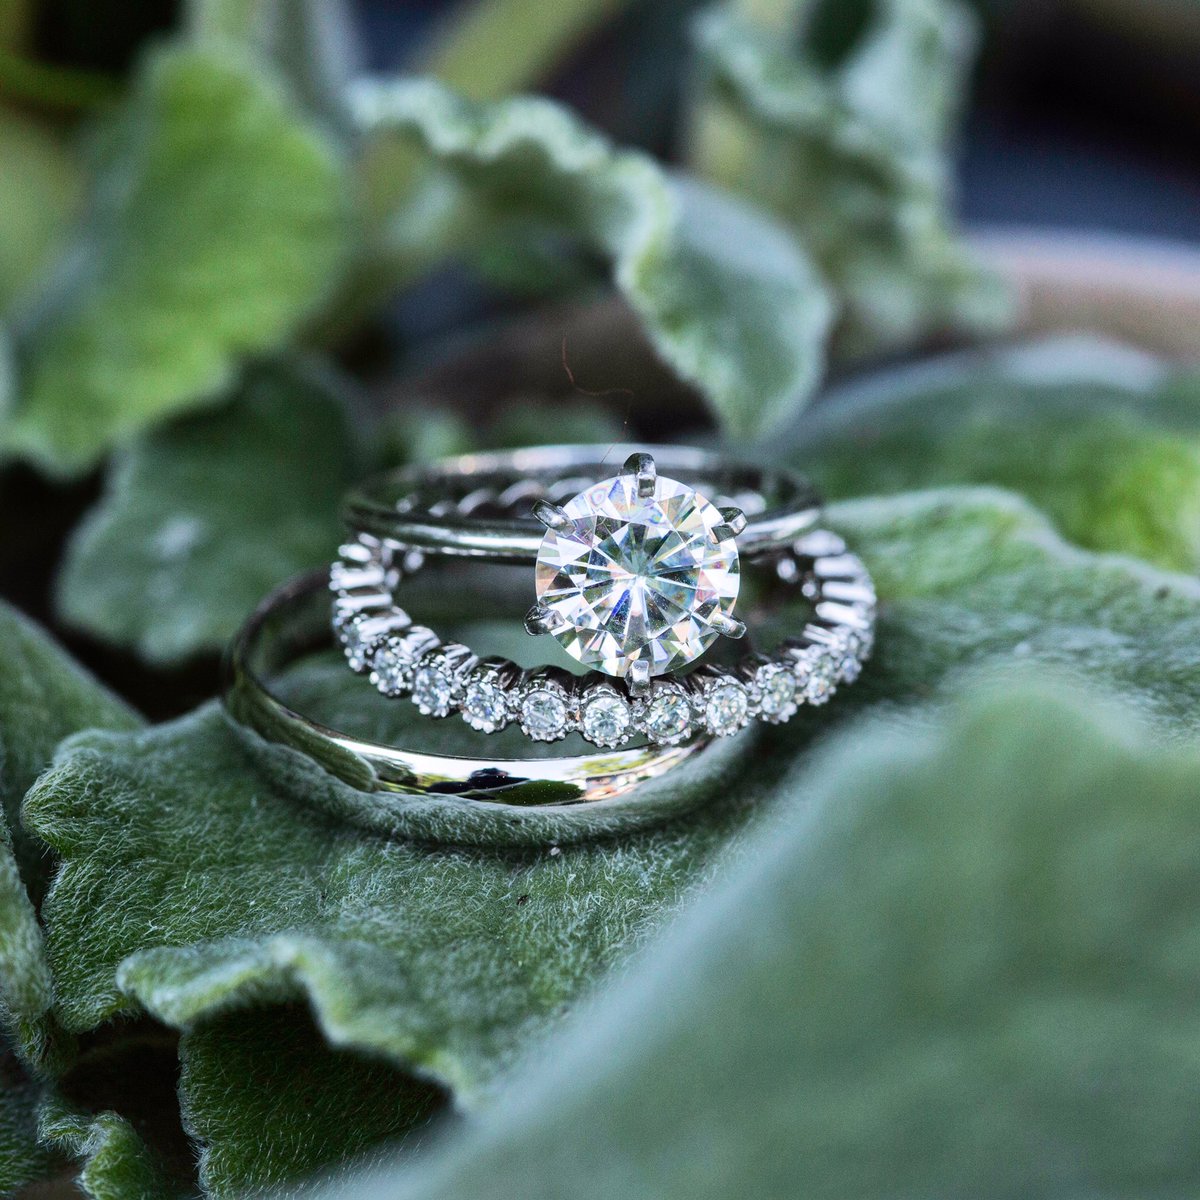 🍀💍🌿 Bringing a little green and maybe a little #Irish to an otherwise drab & dreary day... #happystpatricksday!
📷 @fornearphoto
.
.
.
.
#wedding #weddingphotographer #weddingring #minnesotabride #minnesotawedding #bride